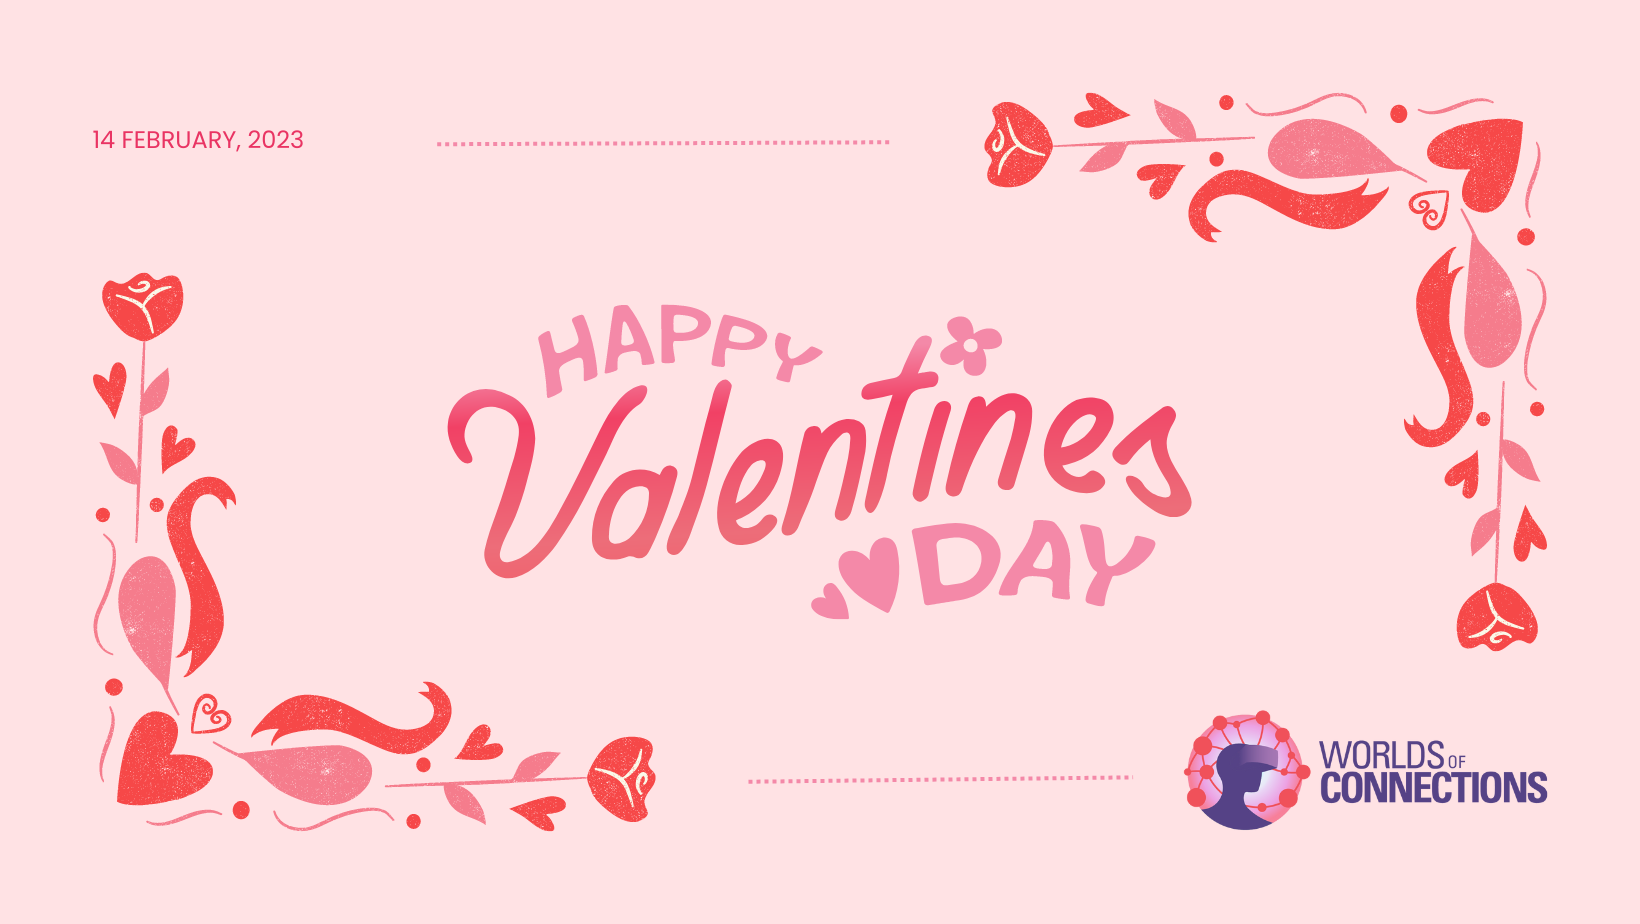 Light pink background with a red-and-pink corner detail with hearts and roses. The message "HAPPY VALENTINE'S DAY" is in the center in large script, and the date "14 FEBRUARY, 2023" is in the upper left corner. The purple "Worlds of Connections" logo featuring a person wearing a VR headset is in the lower right corner